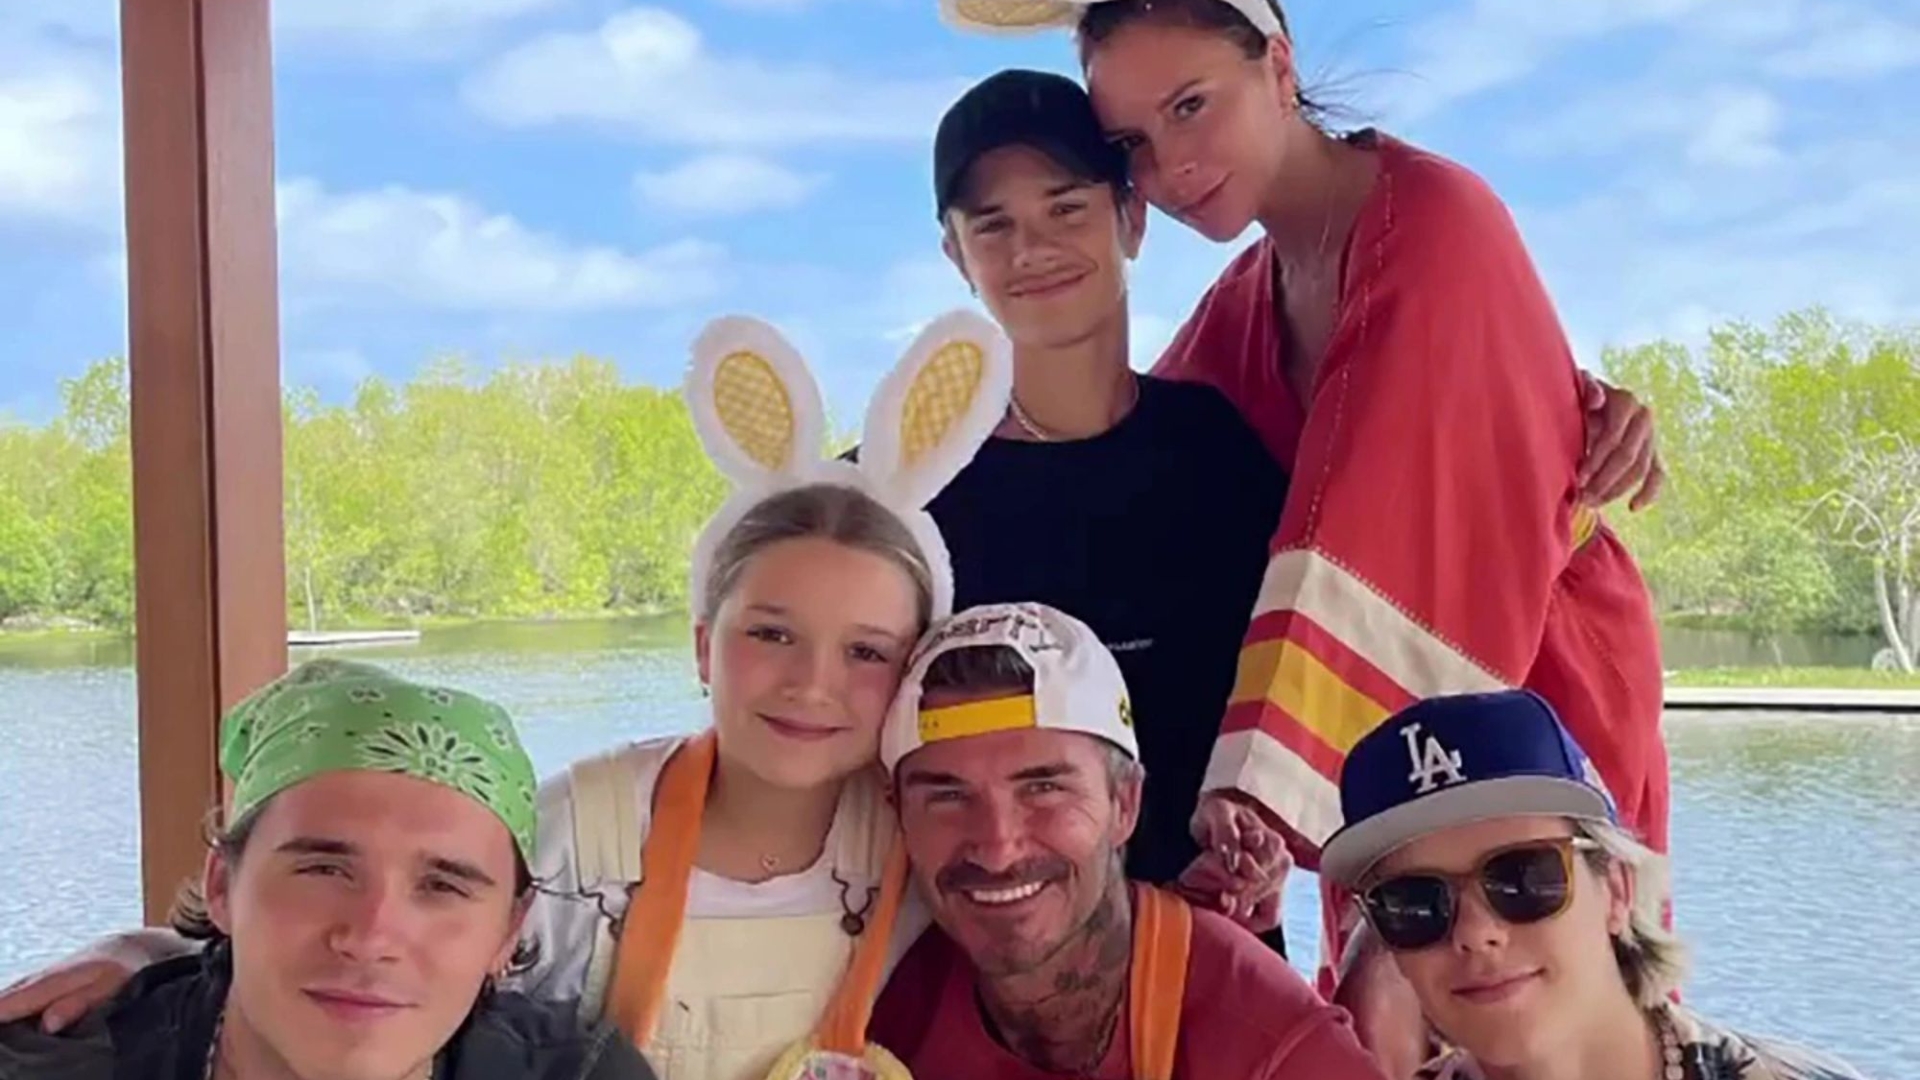 Brooklyn and Nicola Peltz join David and Victoria Beckham for an Easter Reunion